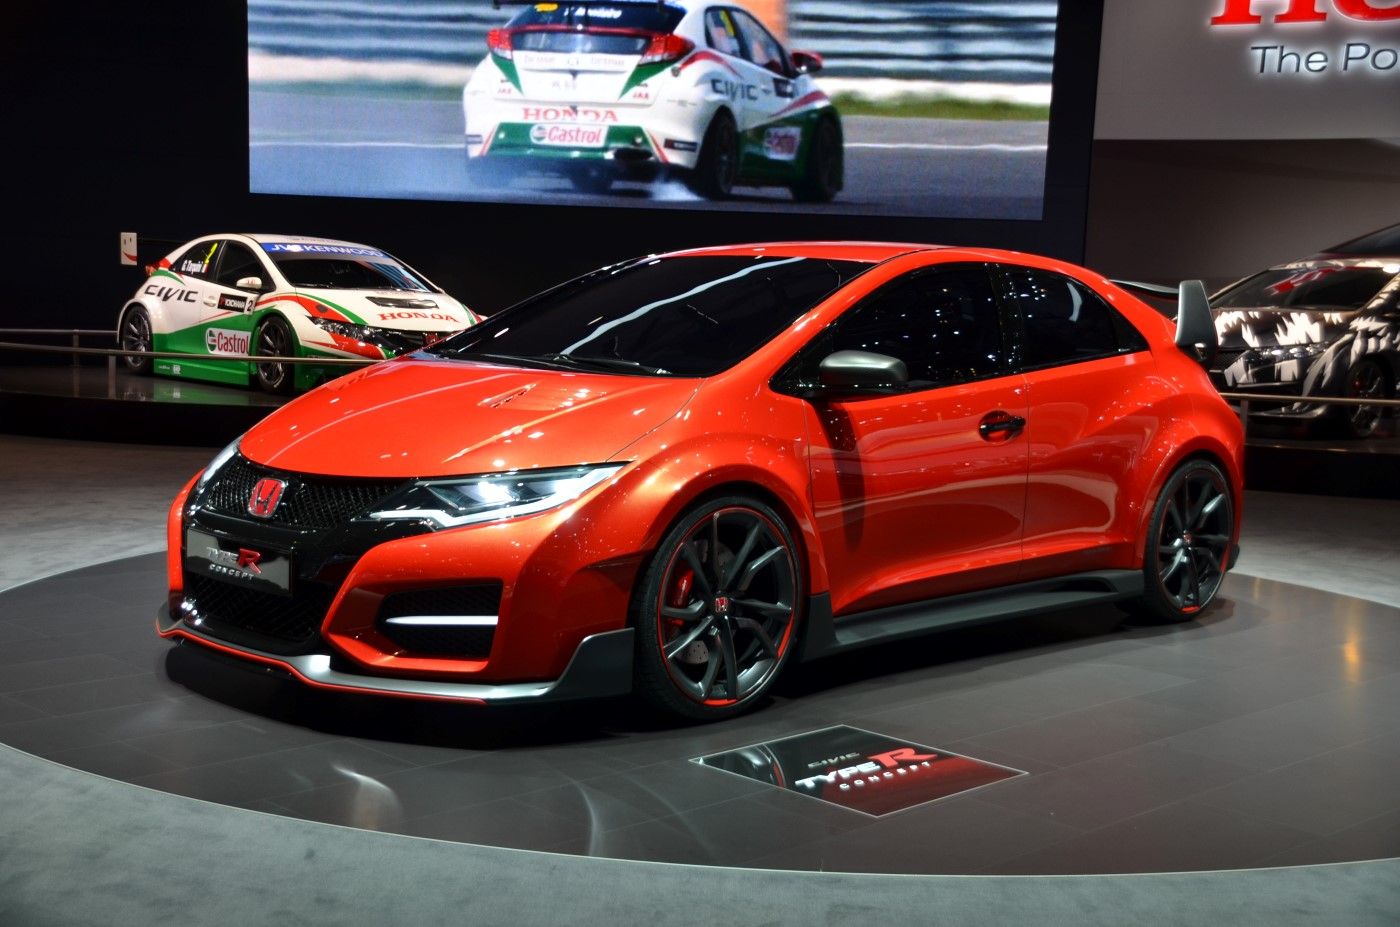 Honda Fans Start Civic Type R Petition For U.S. Sales, But Don't